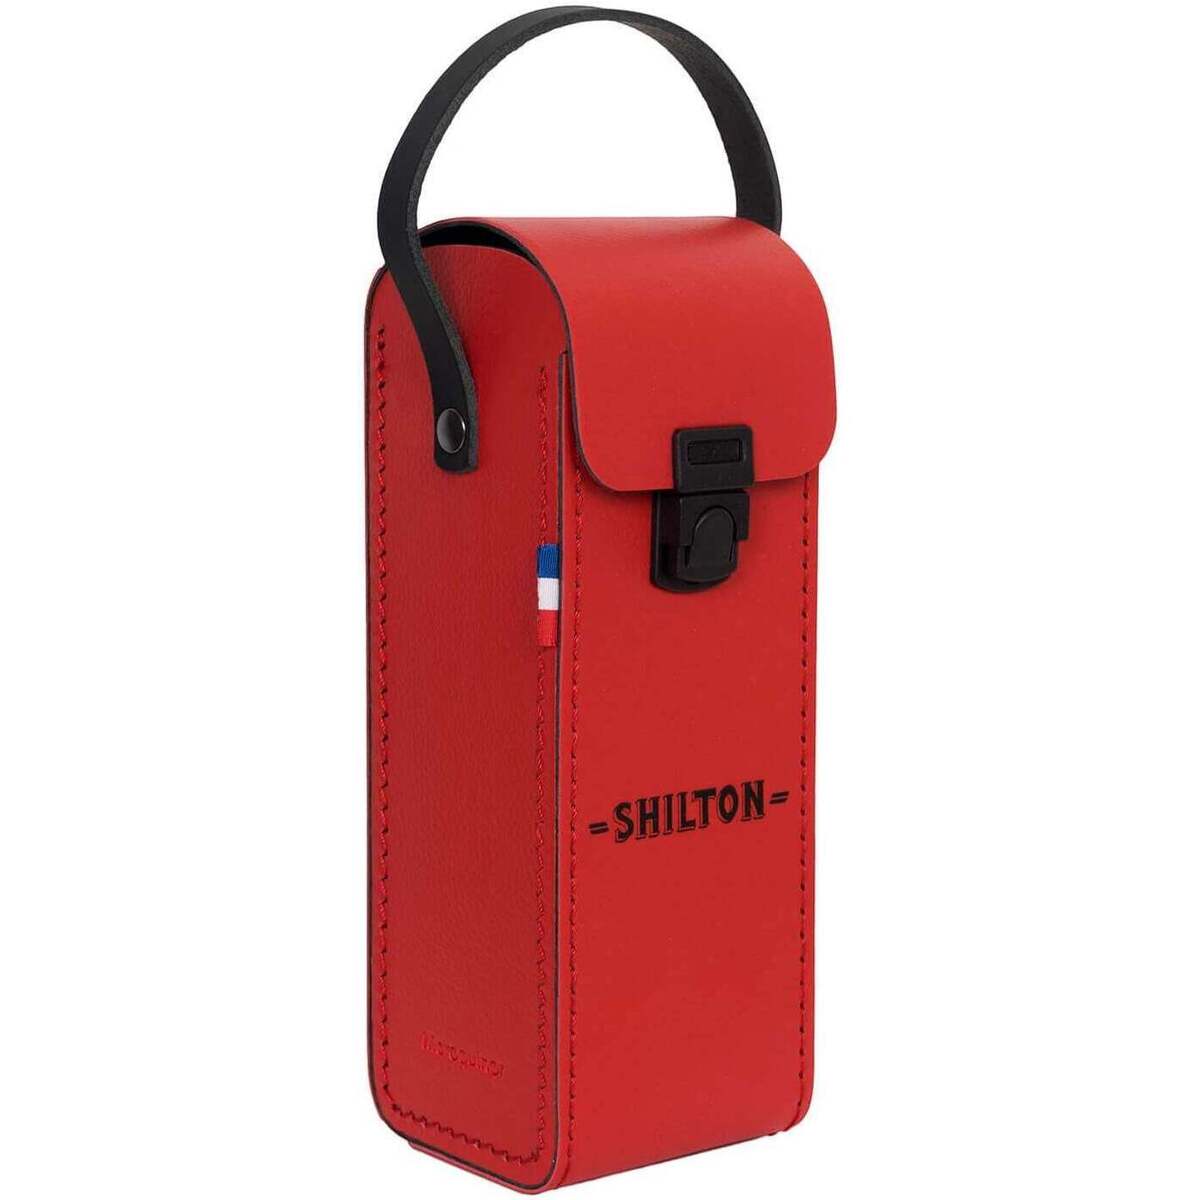 Shilton Rouge Sacoche pétanque made in France MmKgxQ4A